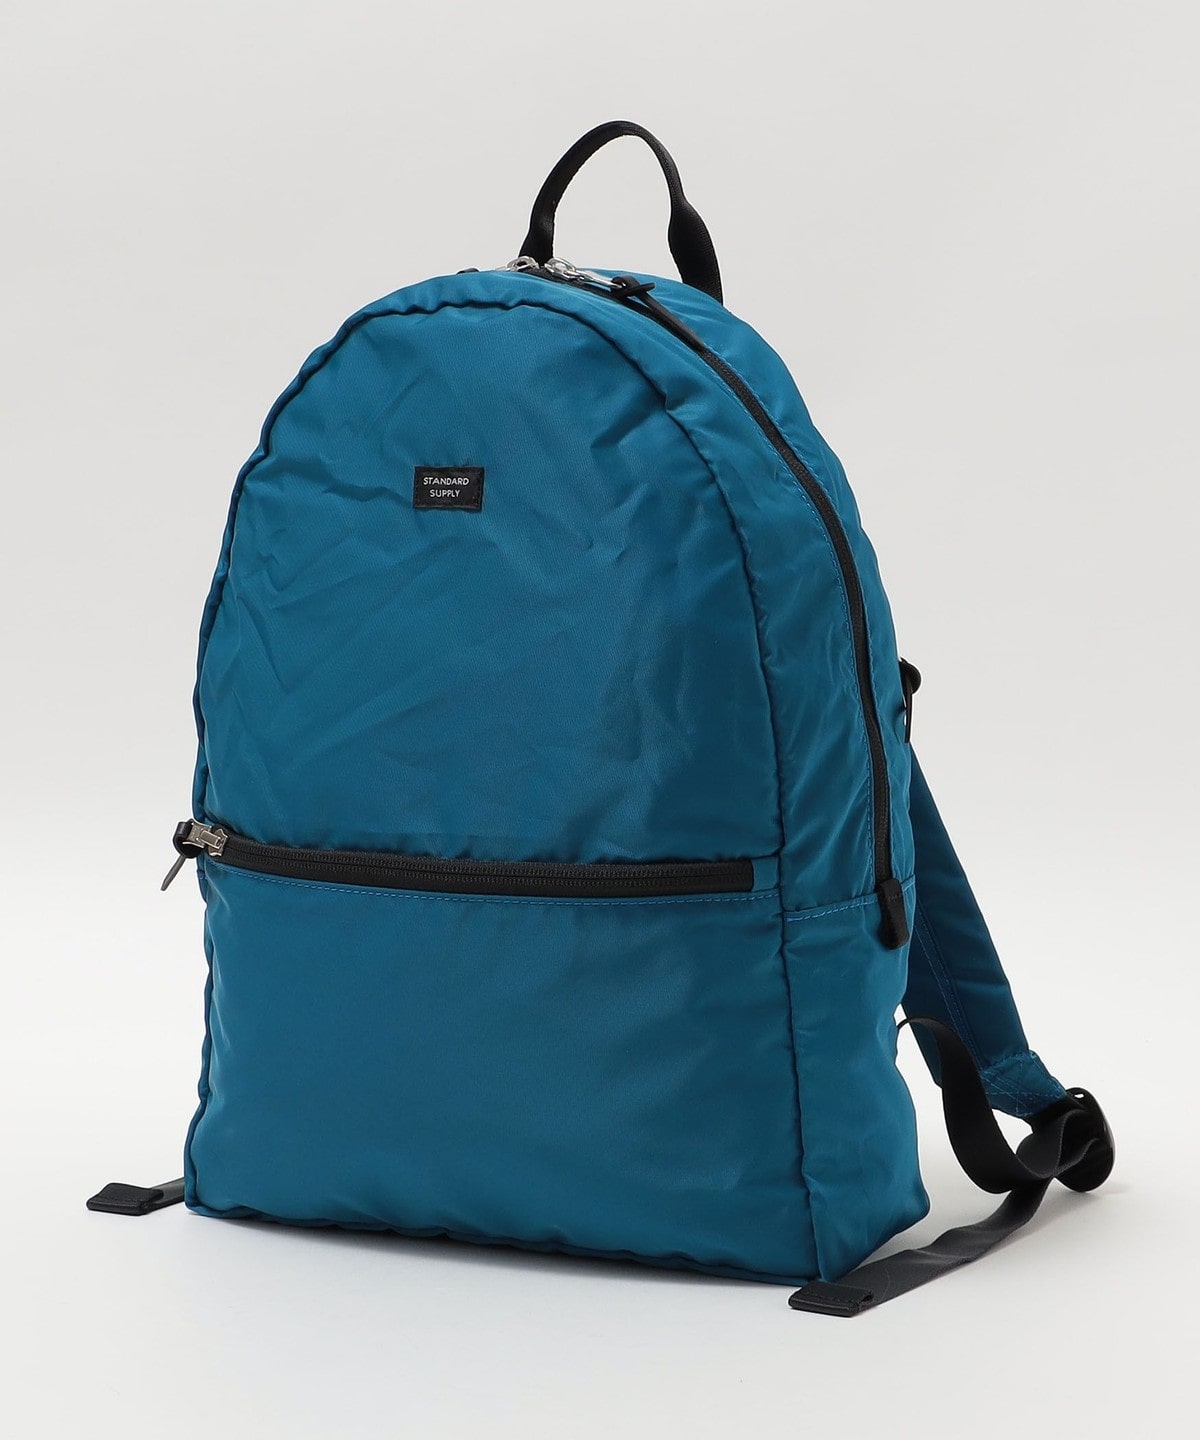 【SHIPS別注】STANDARD SUPPLY: PACKABLE DAYPACK ブルー系